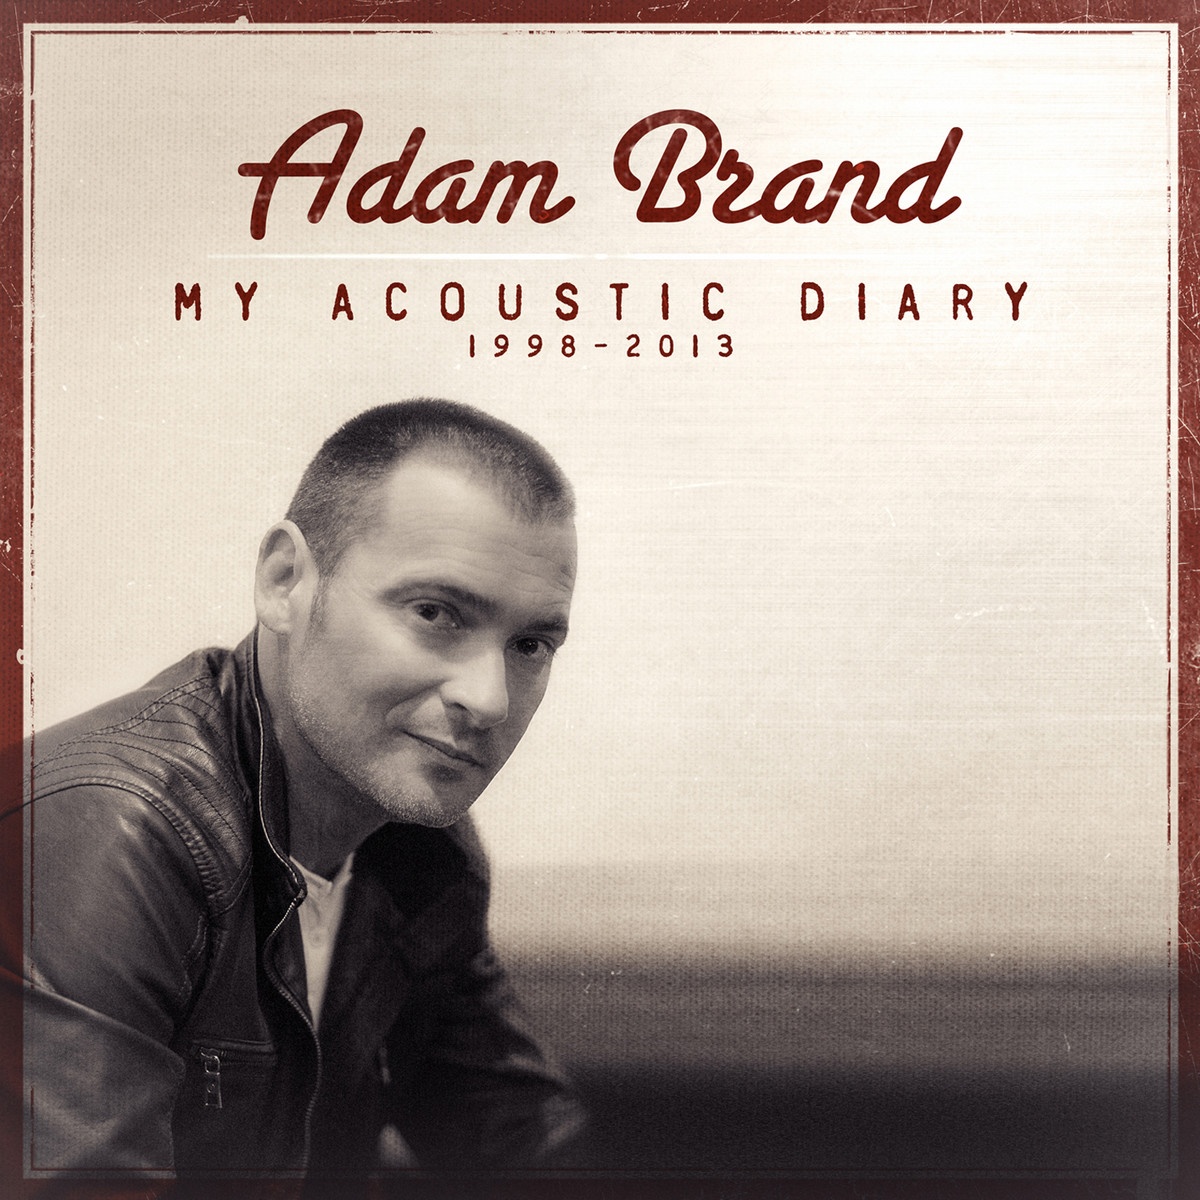 My Acoustic Diary